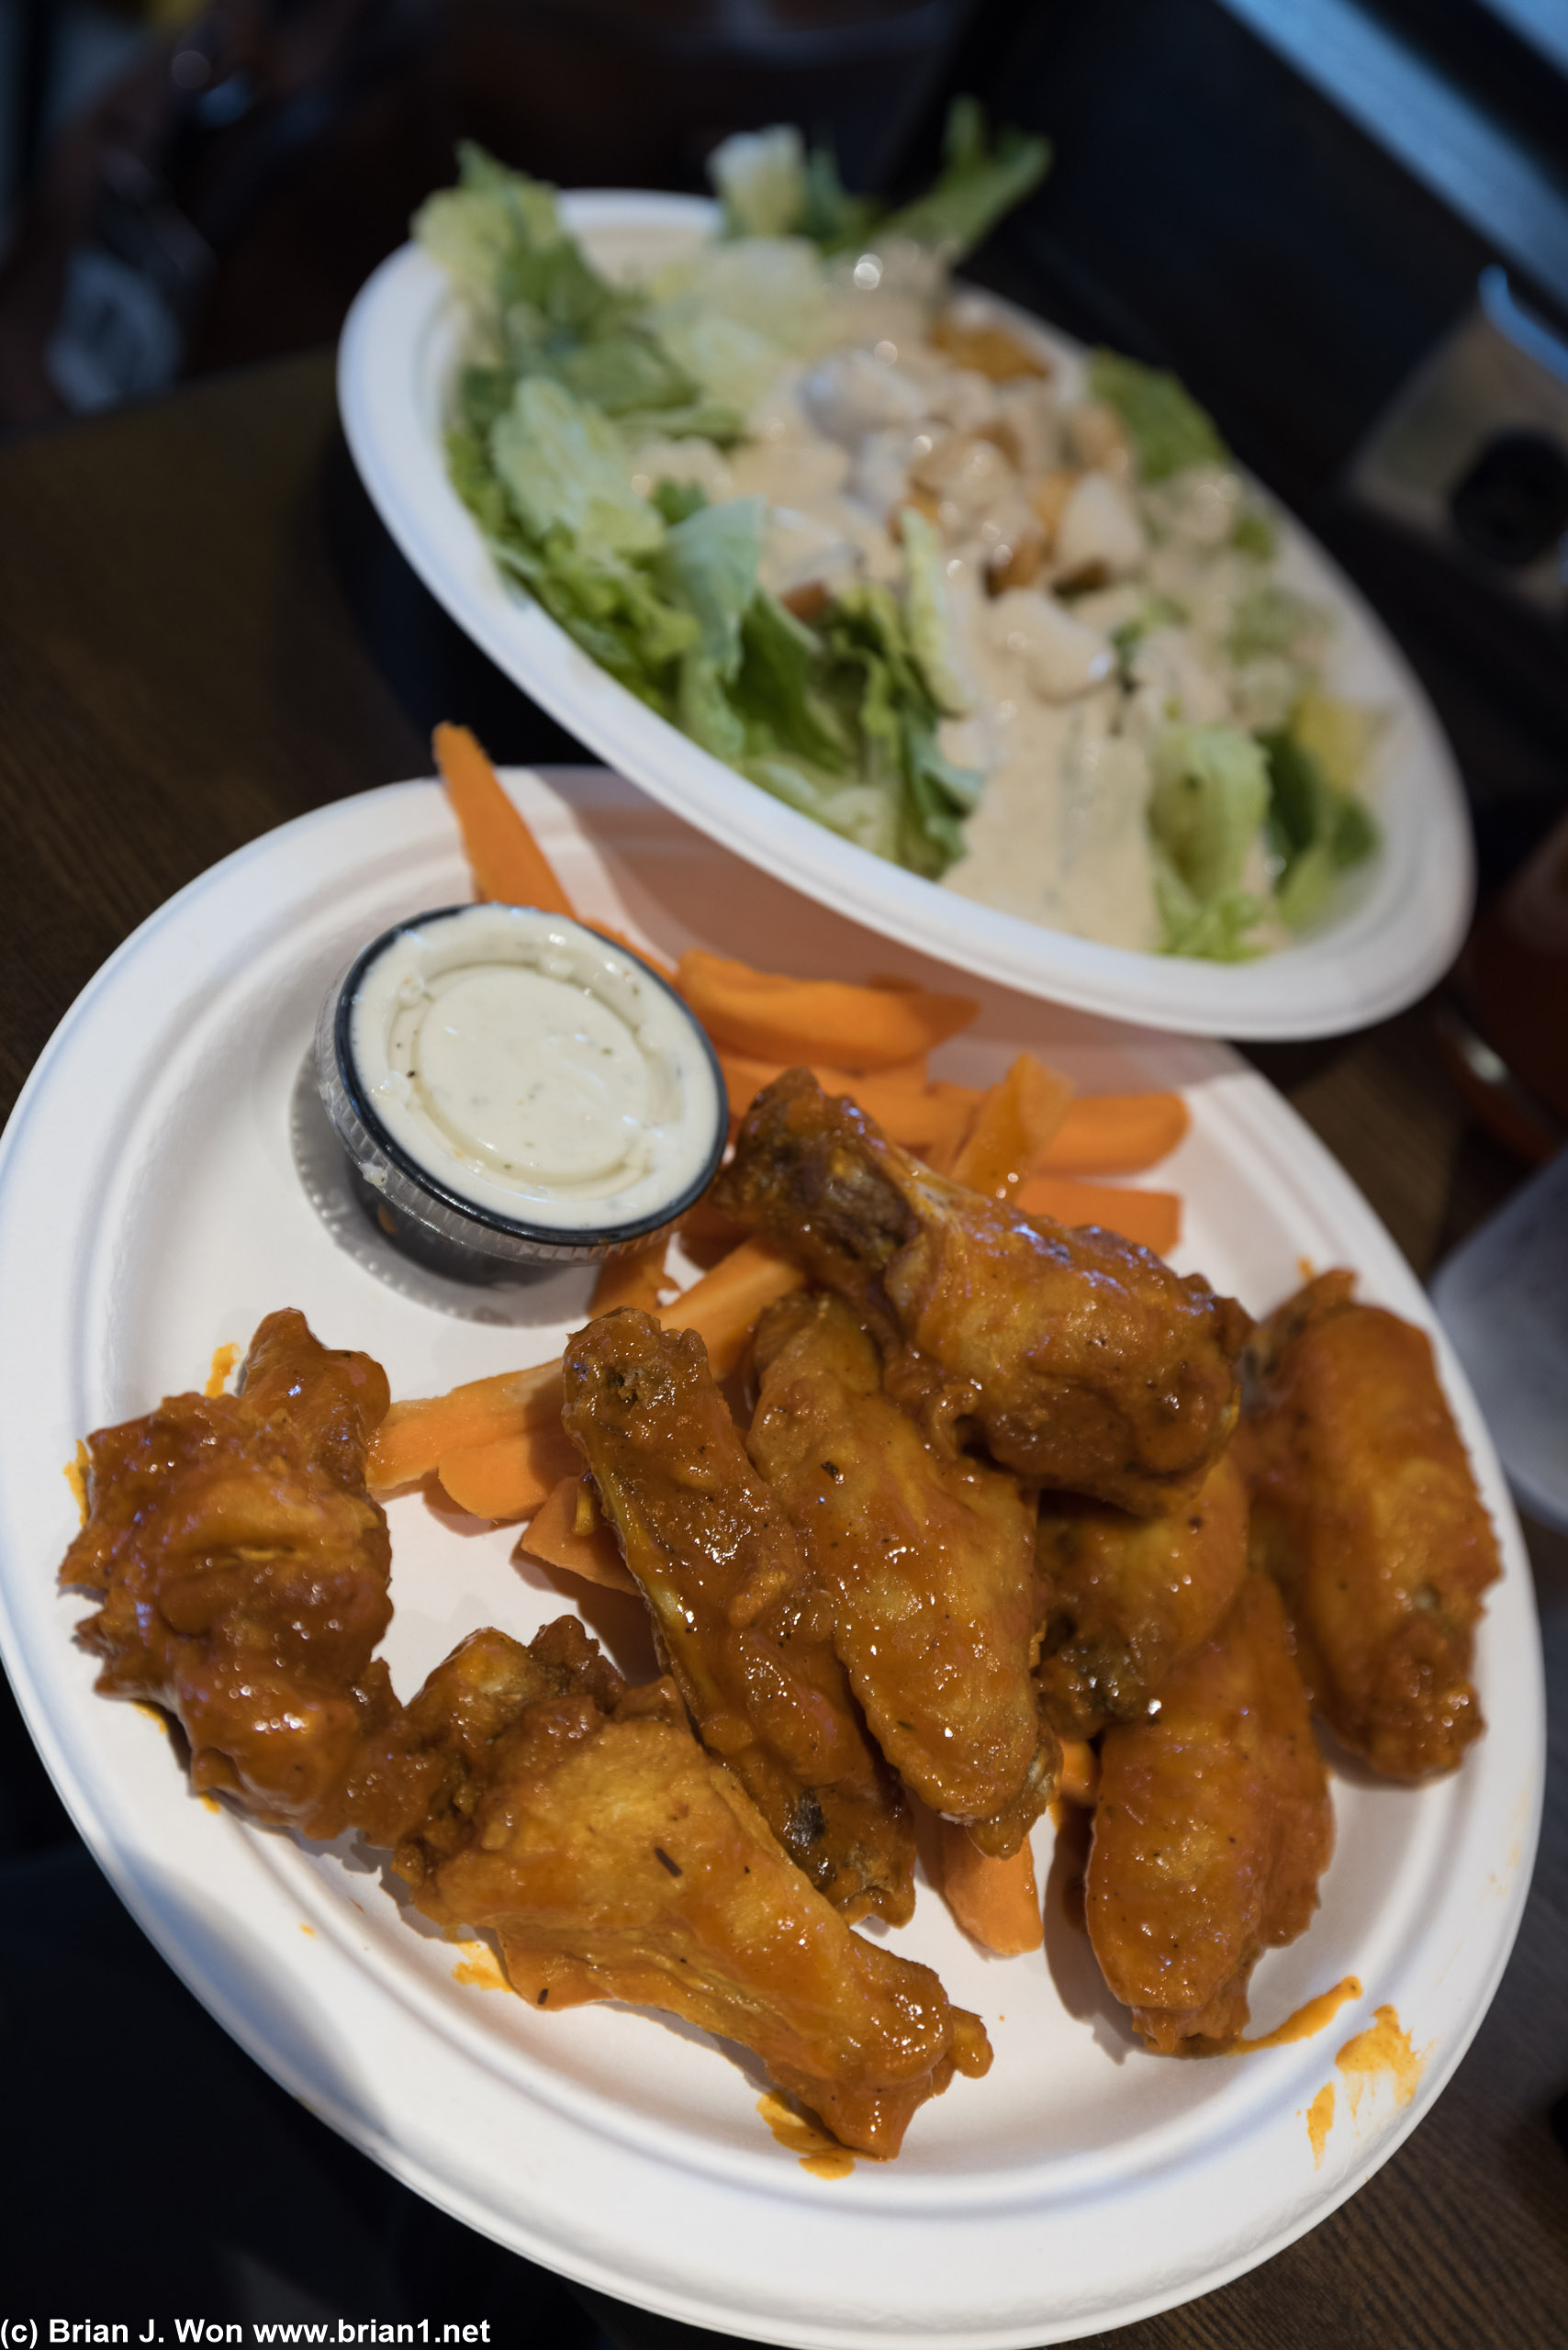 Phx Beer Co. Wings were tepid in temp and taste. Salad was drenched. GROSS.